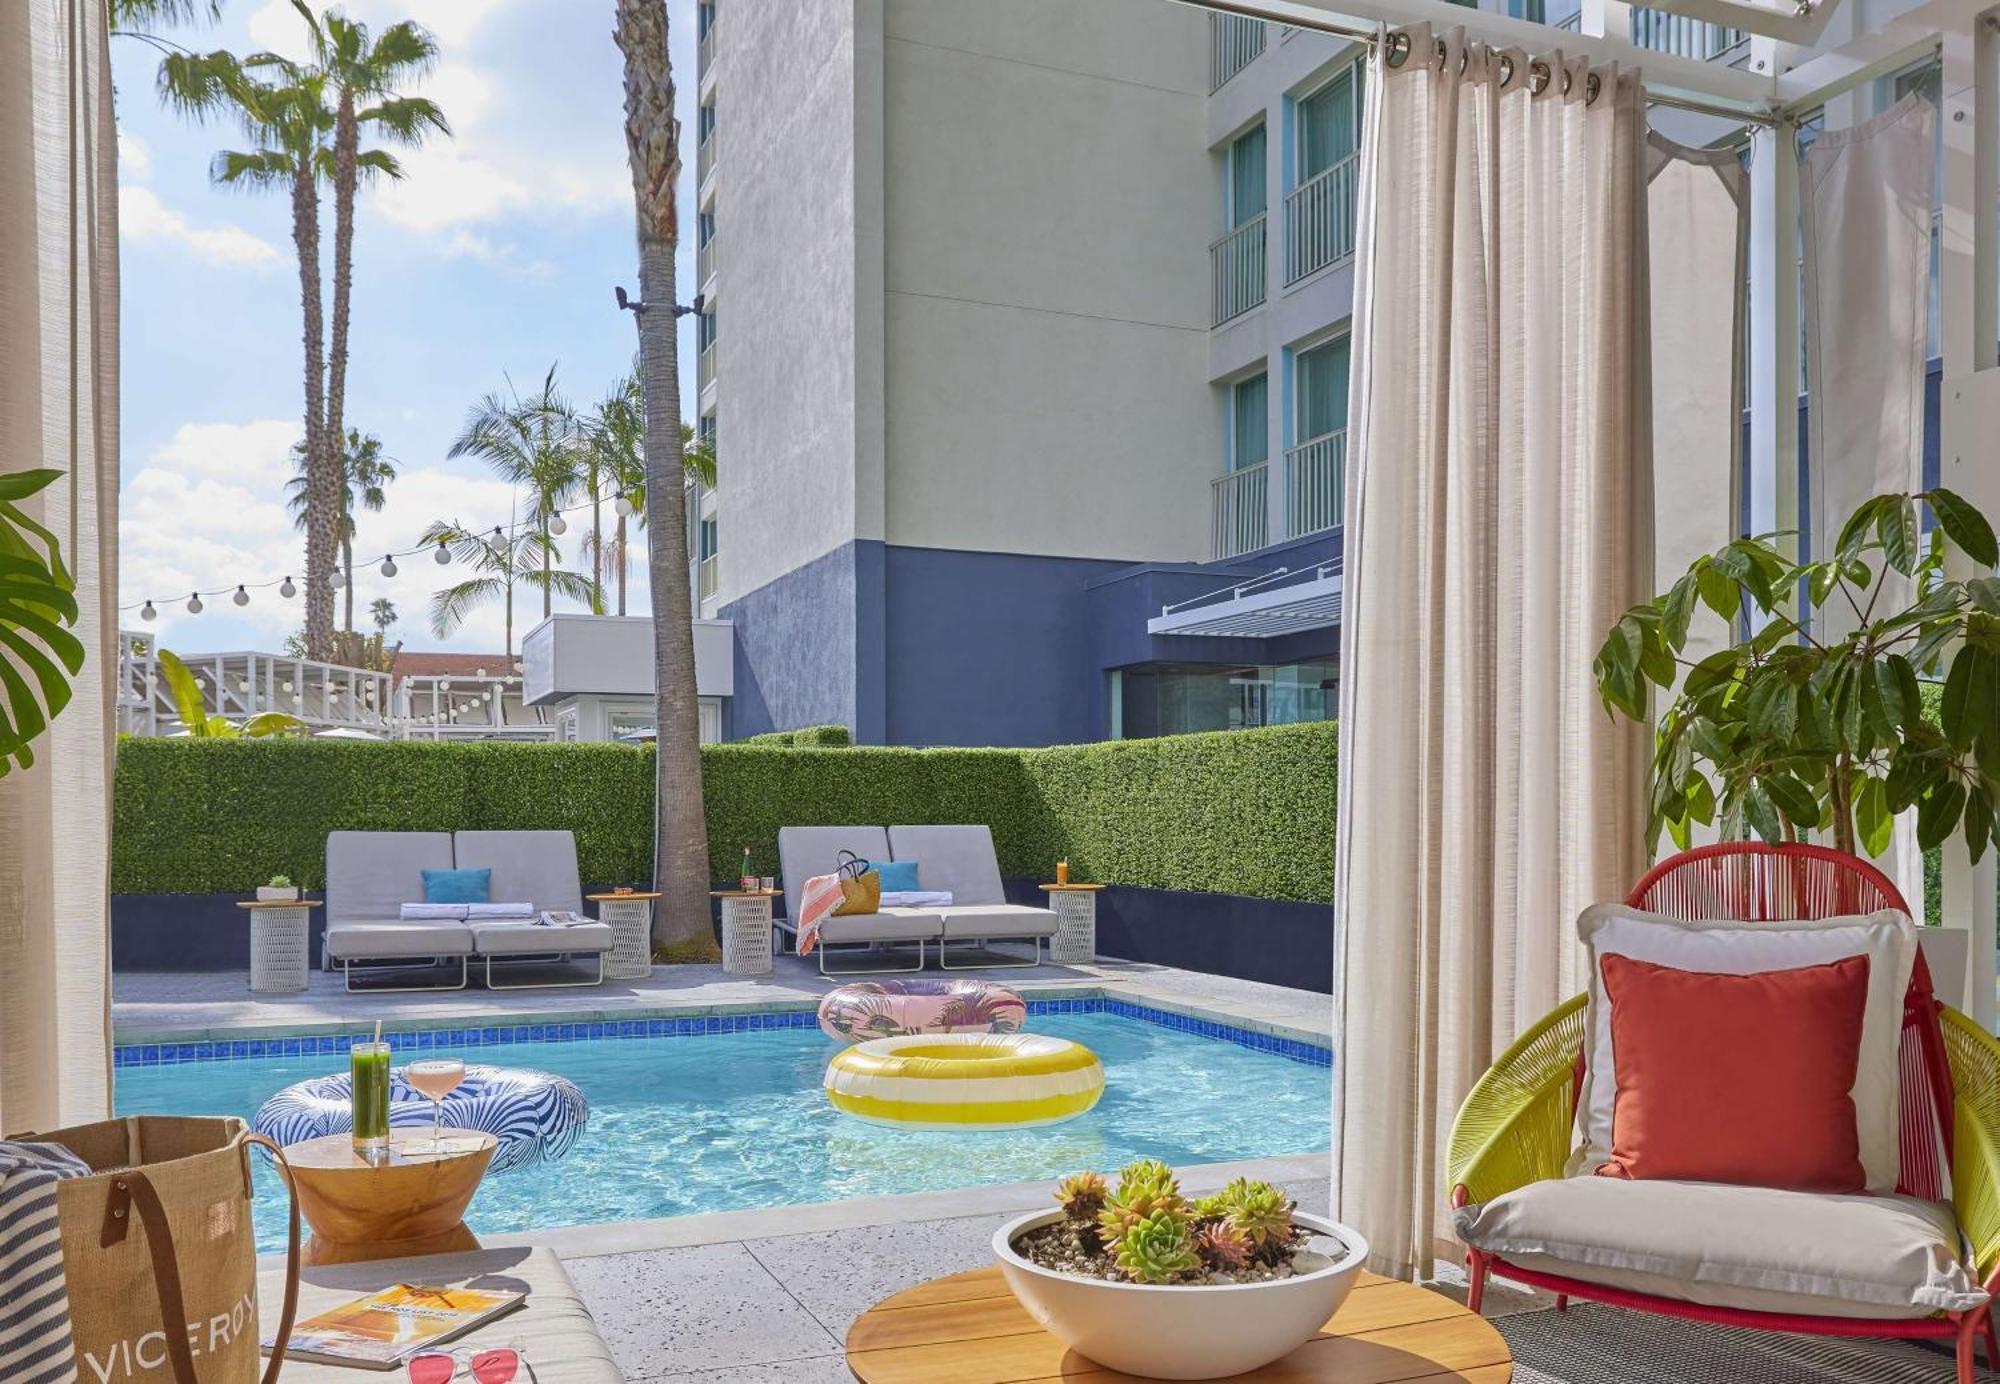 HOTEL VICEROY SANTA MONICA LOS ANGELES, CA 4* (United States) - from £ 306